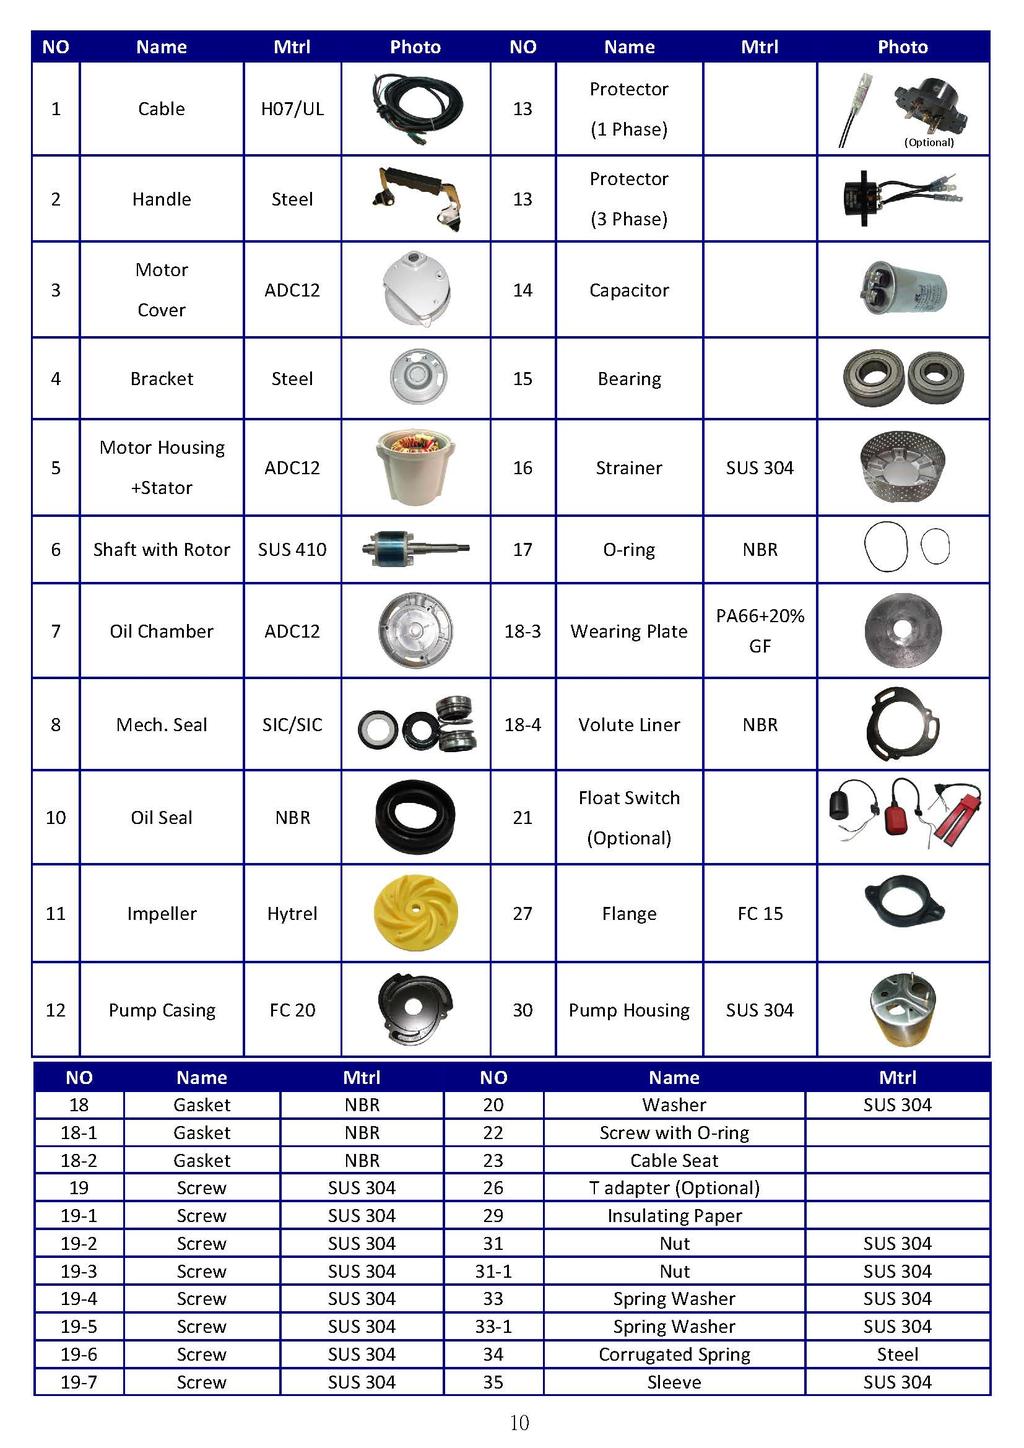 List of Parts